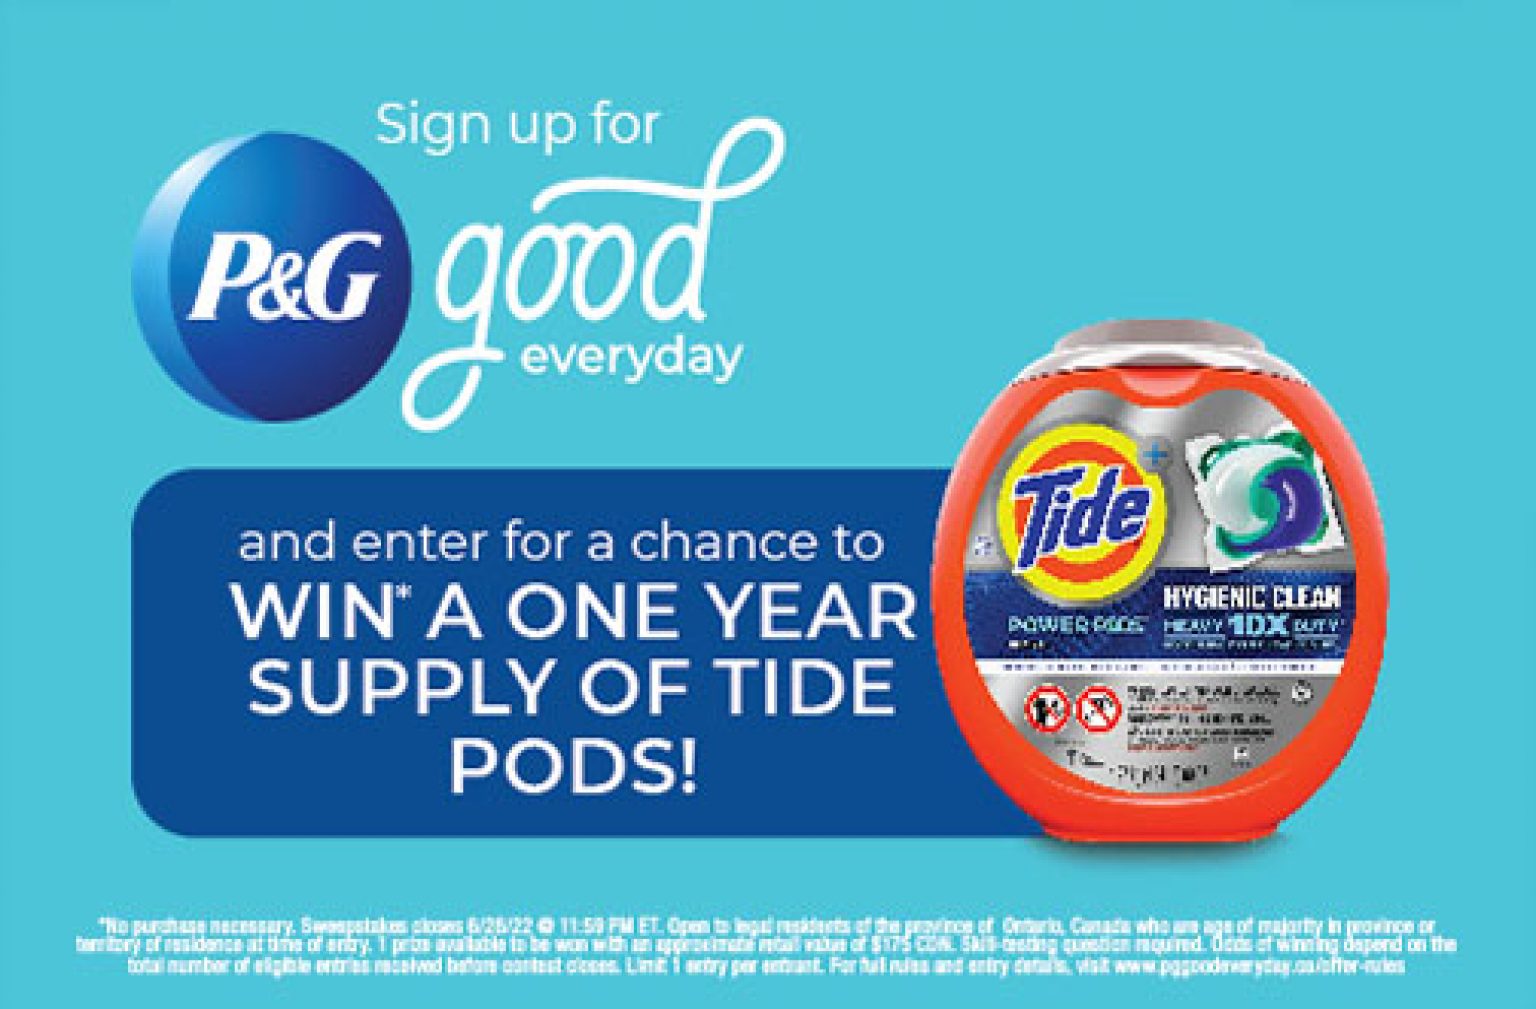 p-g-good-everyday-contest-deals-from-savealoonie